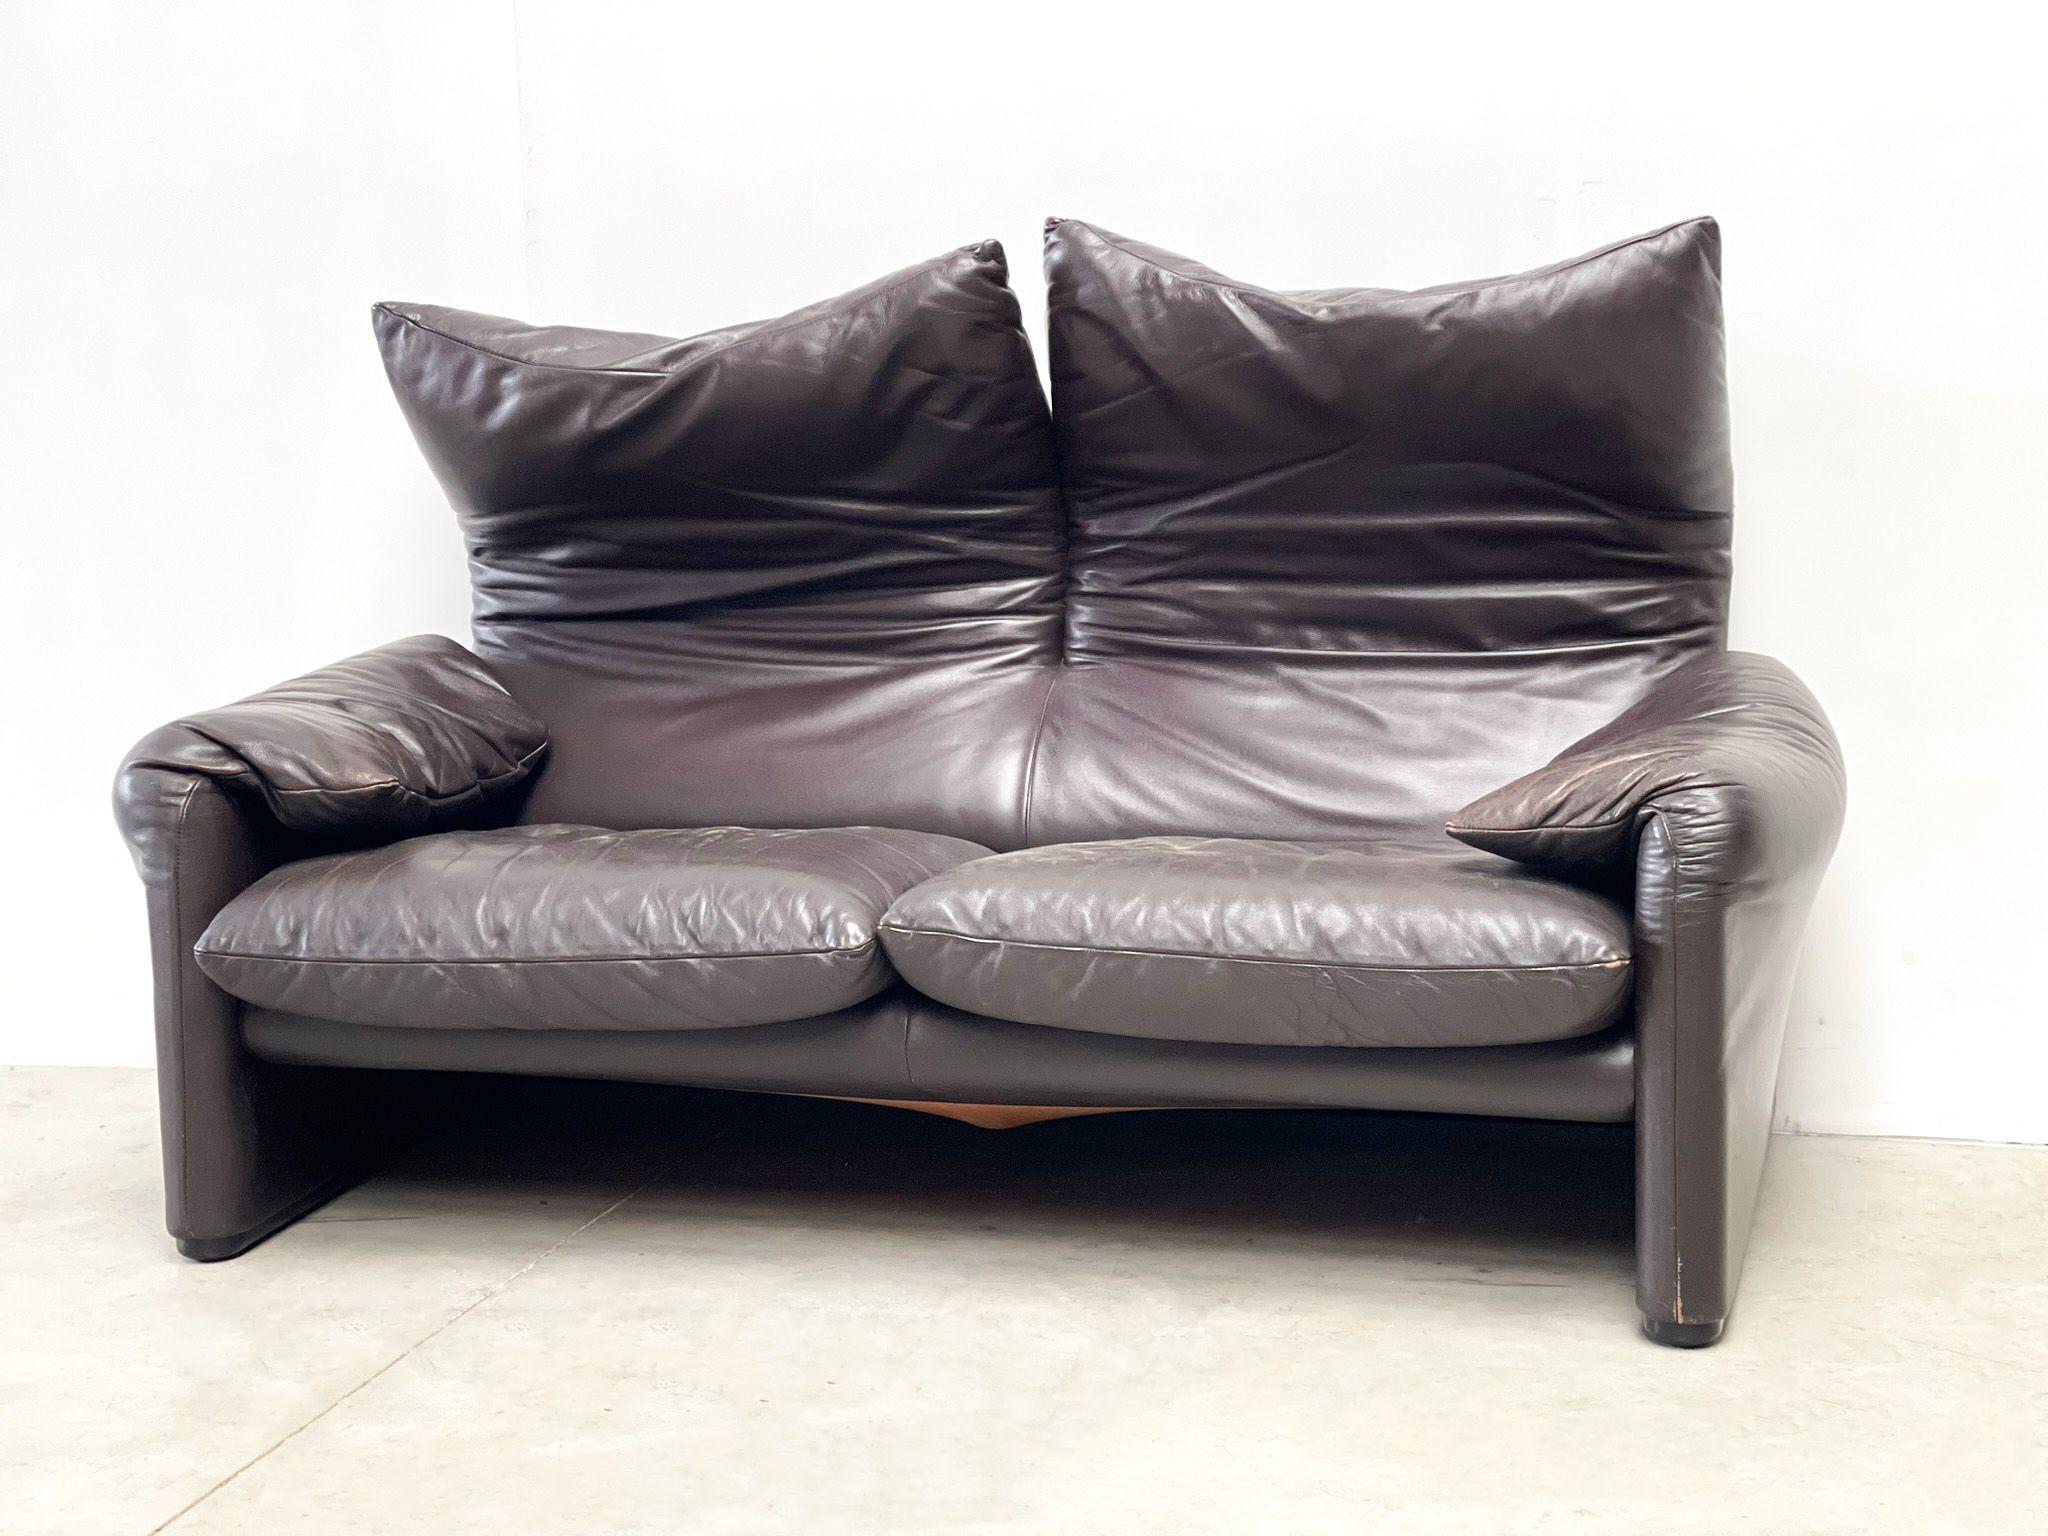 Vintage dark brown leather maralunga sofa designed by Vico Magistretti for Cassina in 1973.

Iconic design sofa with a timeless look.

The backrests are adjustable.

Good condition.

1970s- Italy

Dimensions
H 28 in. x W 65 in. x D 35